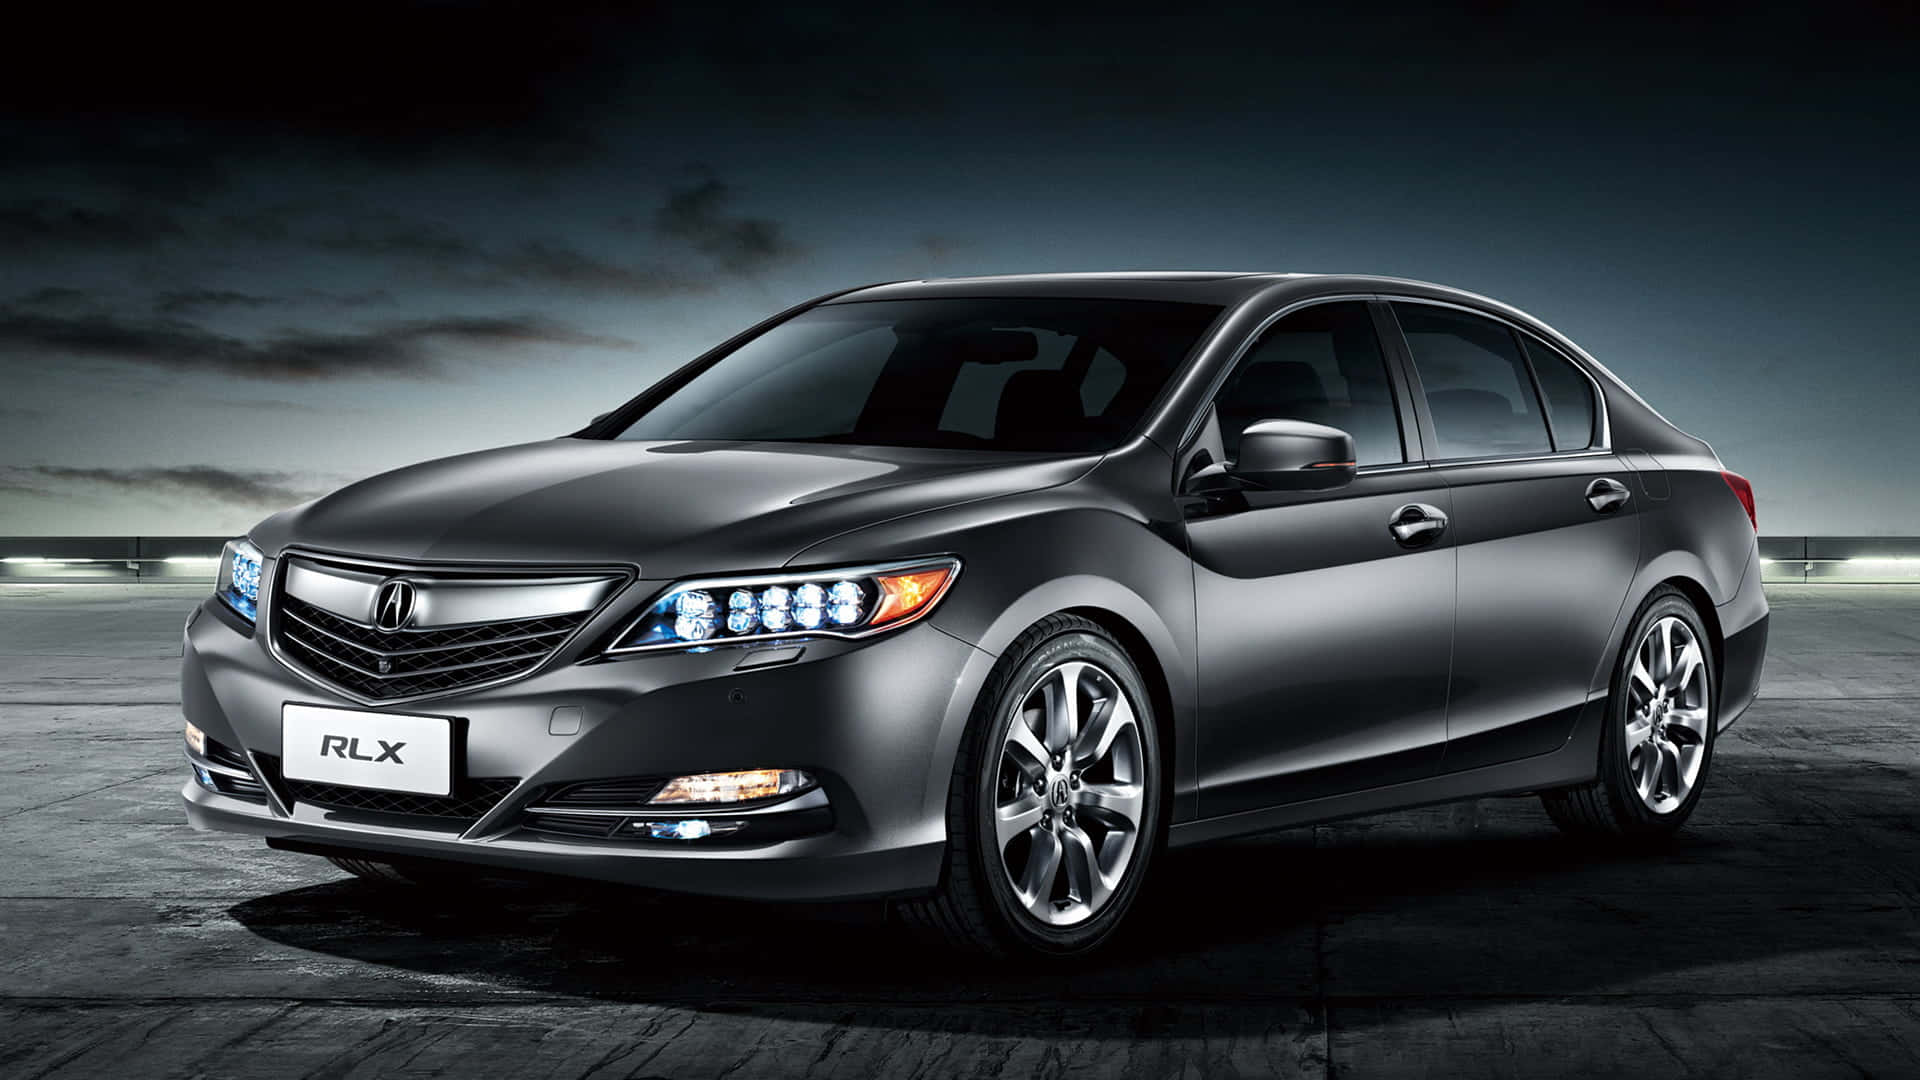 Sleek and Stylish Acura RLX in High Definition Wallpaper